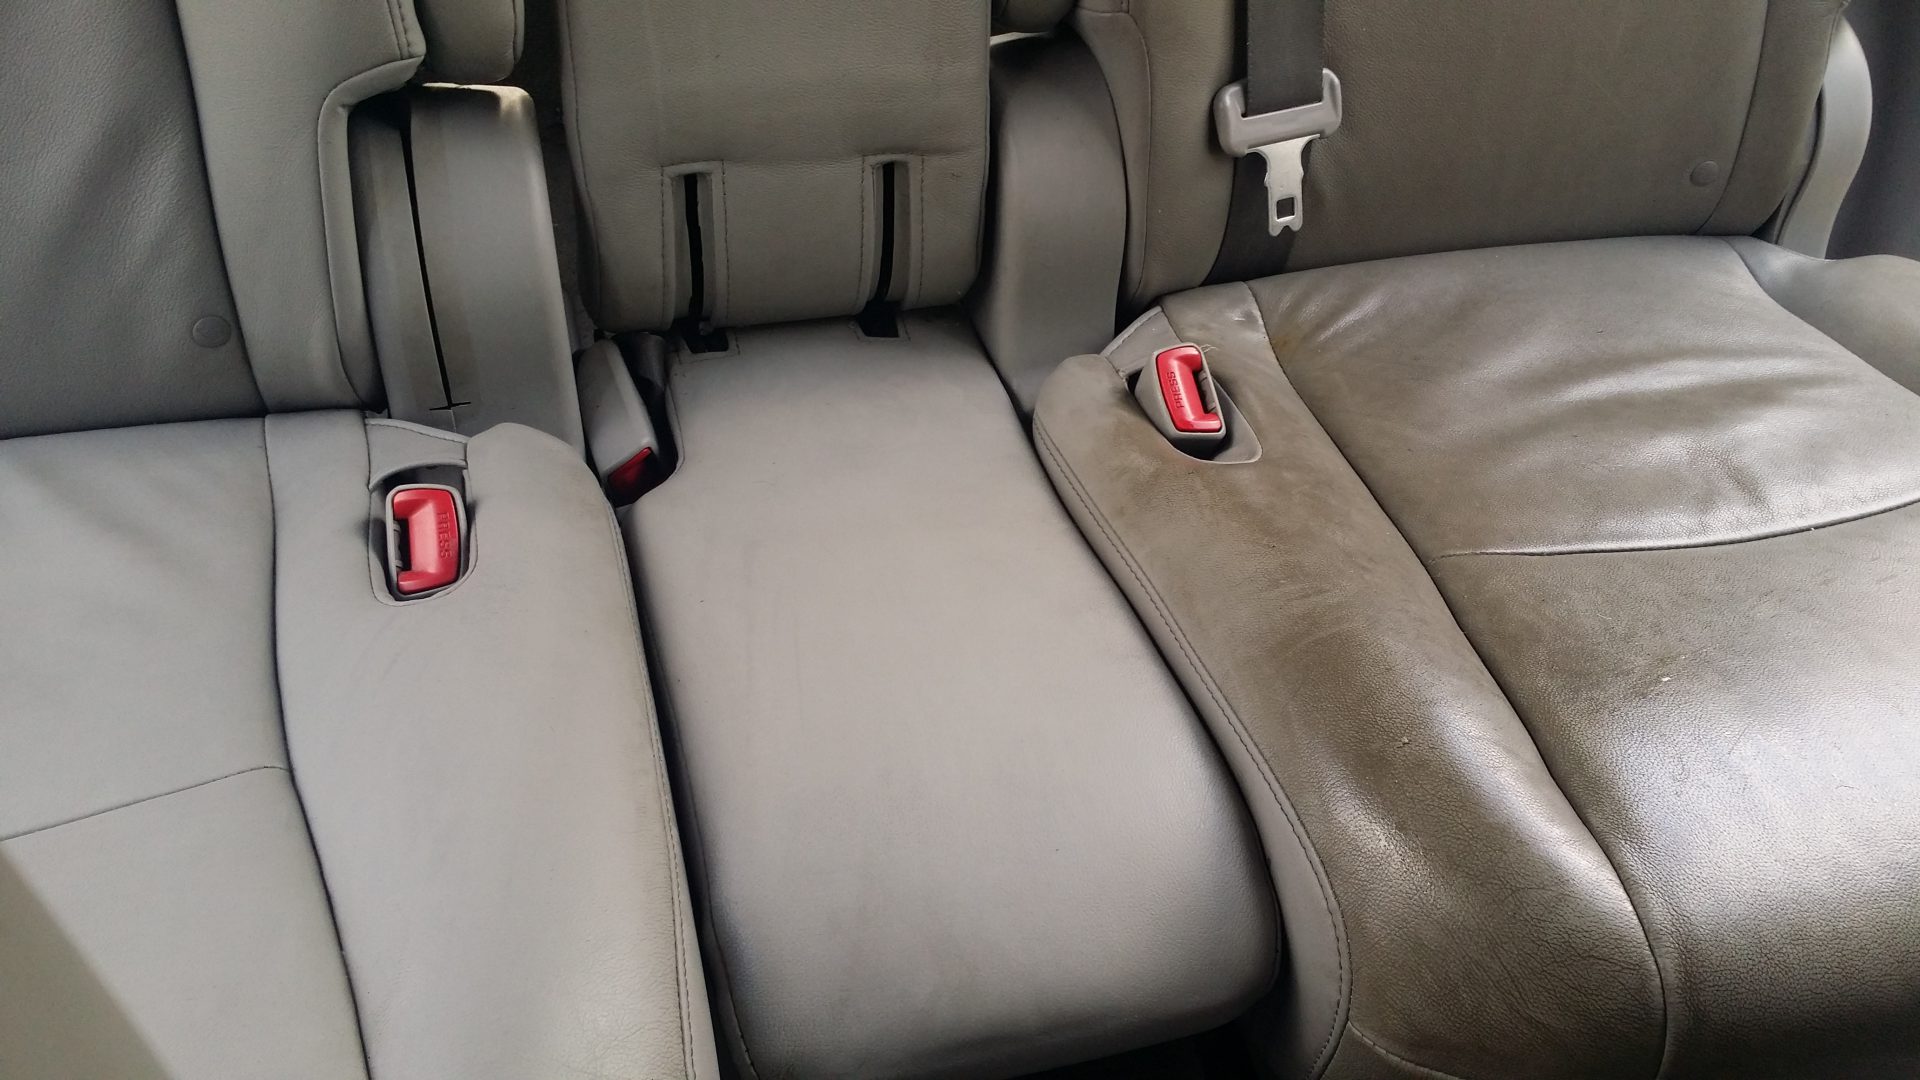 Can You Steam Clean Leather Car Seats?